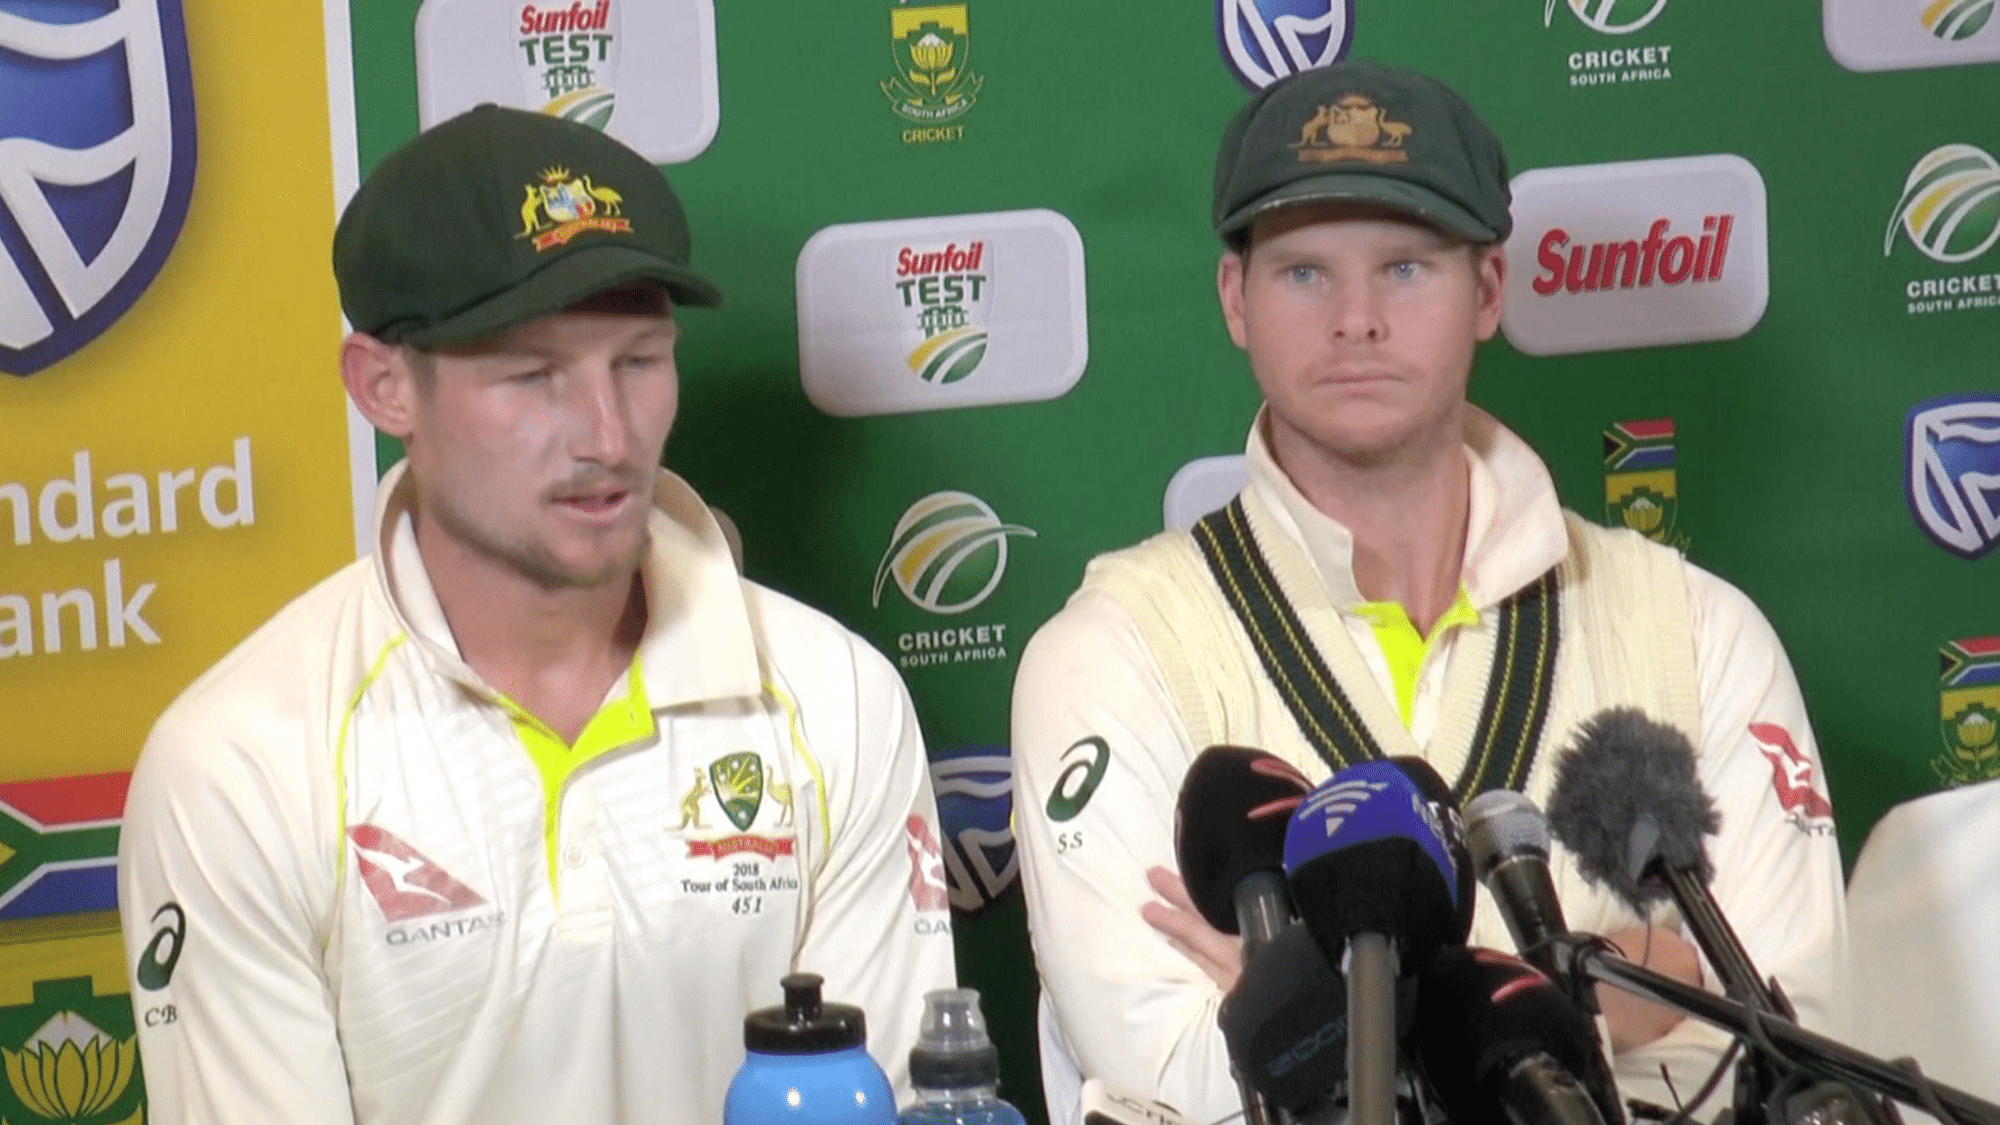 Steve Smith (R) and Cameron Bancroft speak to the media about the ball-tampering row during the third Test against South Africa.